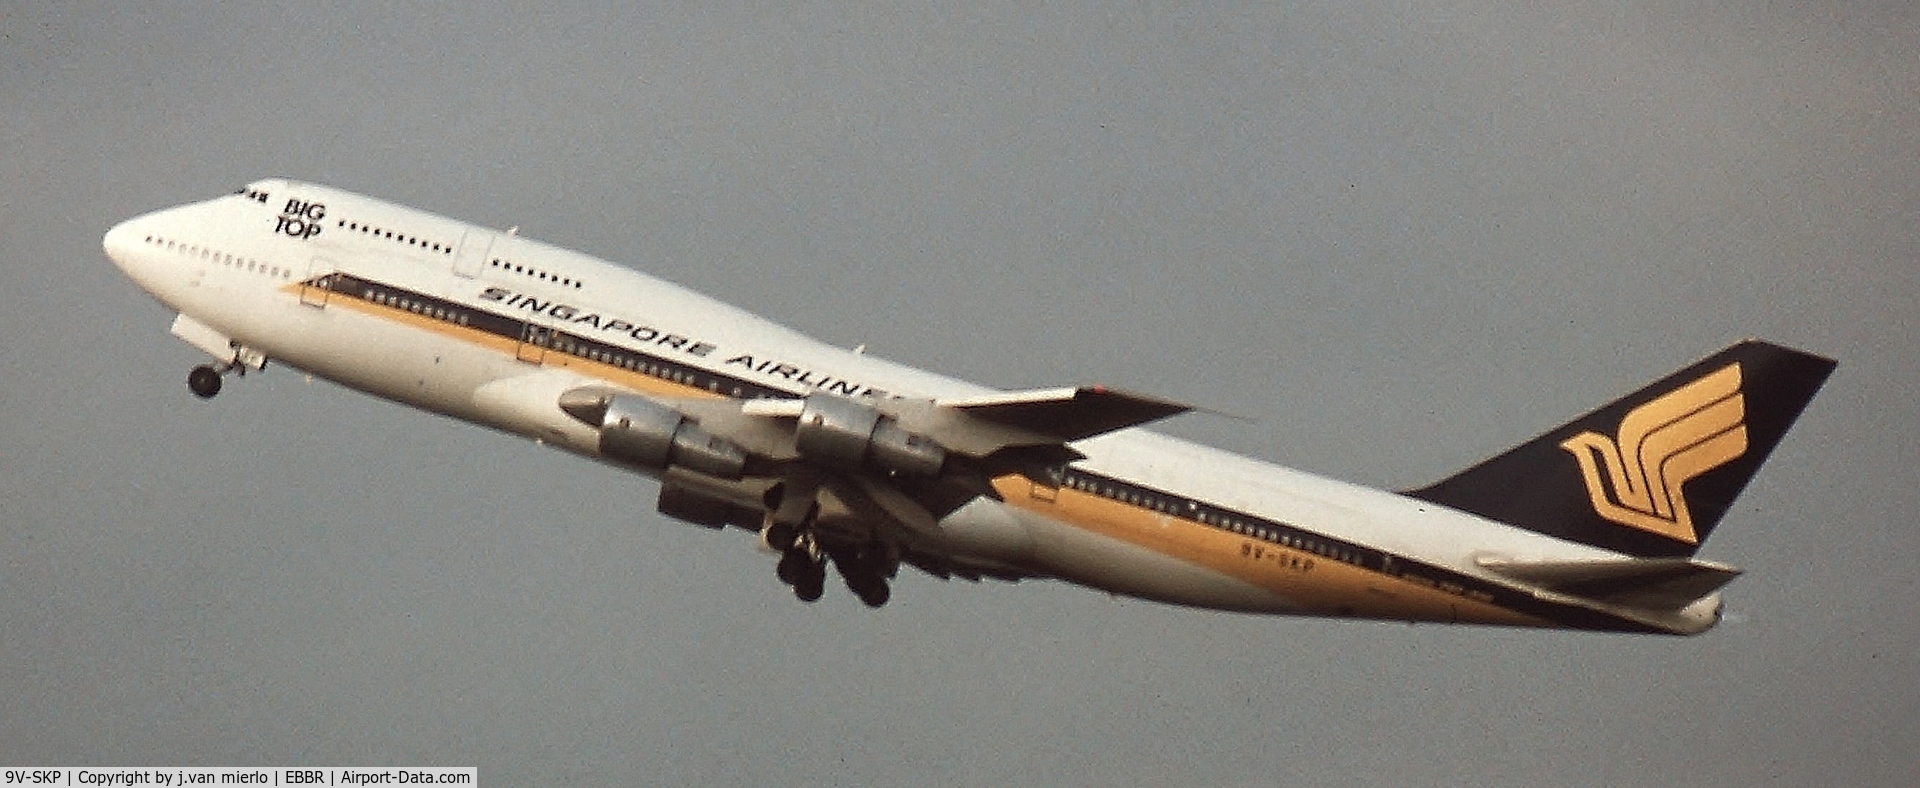 9V-SKP, 1987 Boeing 747-312 C/N 23769, Climbing out of Brussels 25R